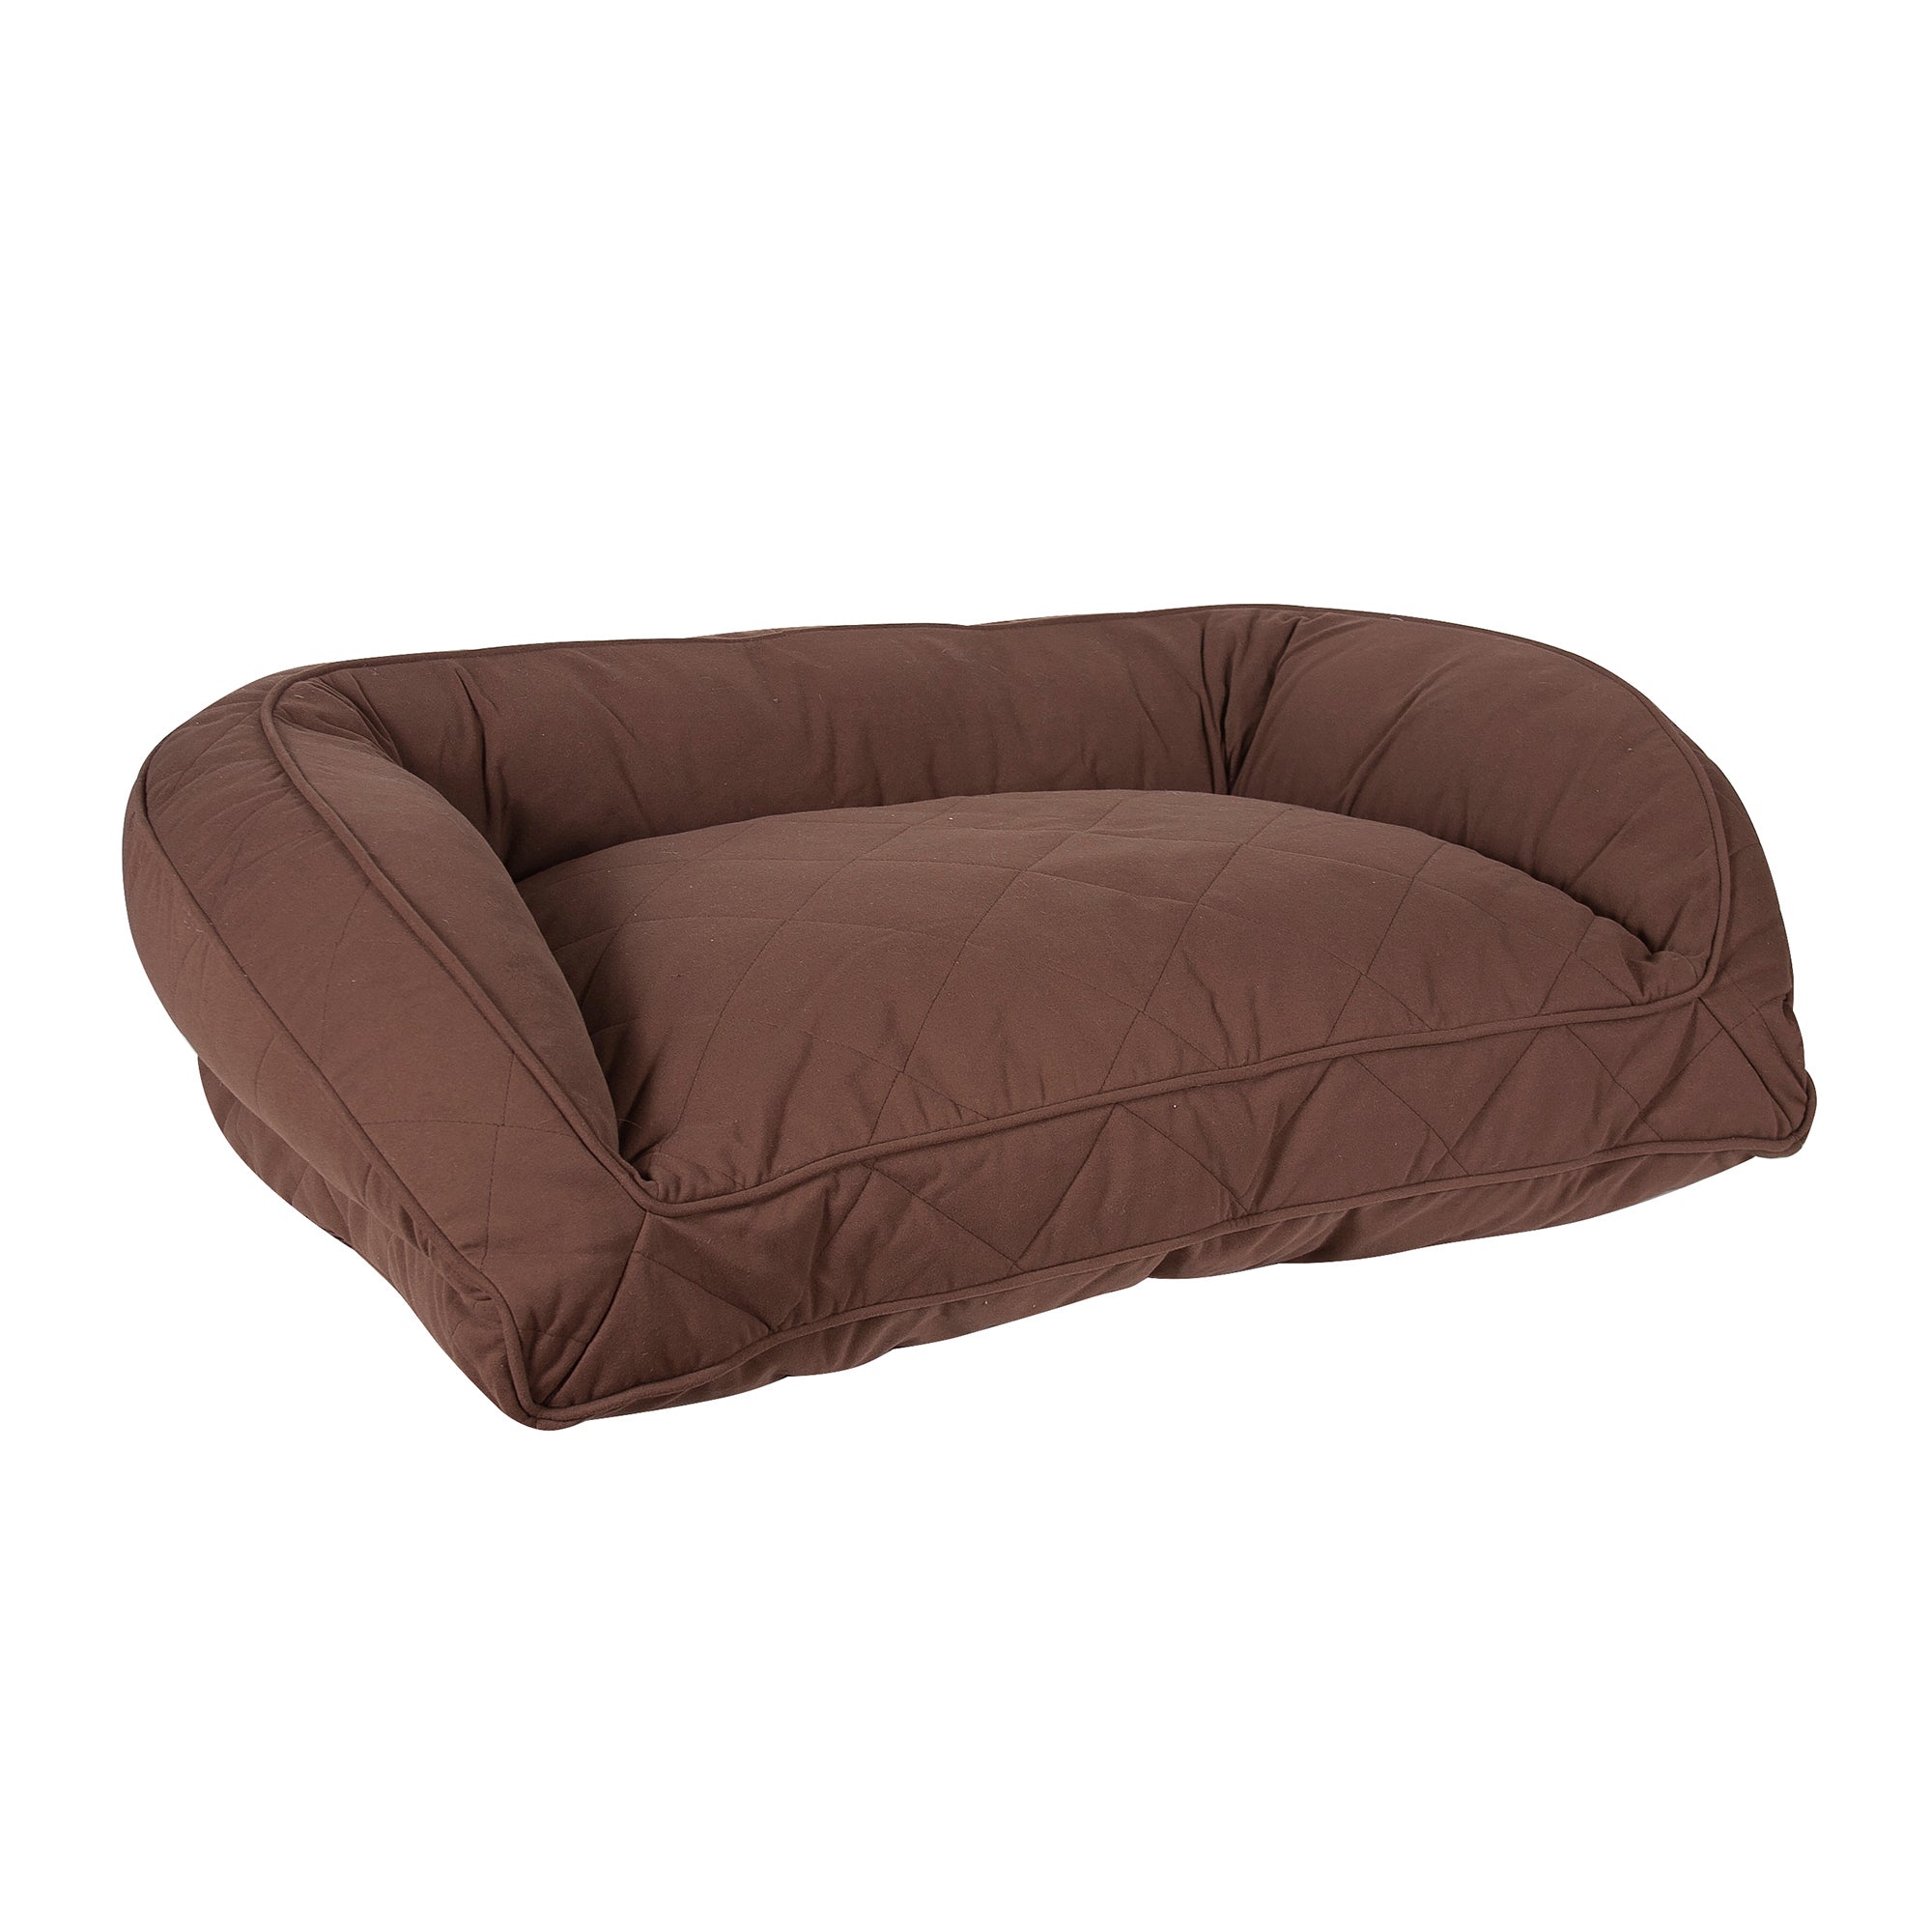 QUILTED-MICROFIBER-ORTHOPEDIC-DOG-BED-CHOCOLATE